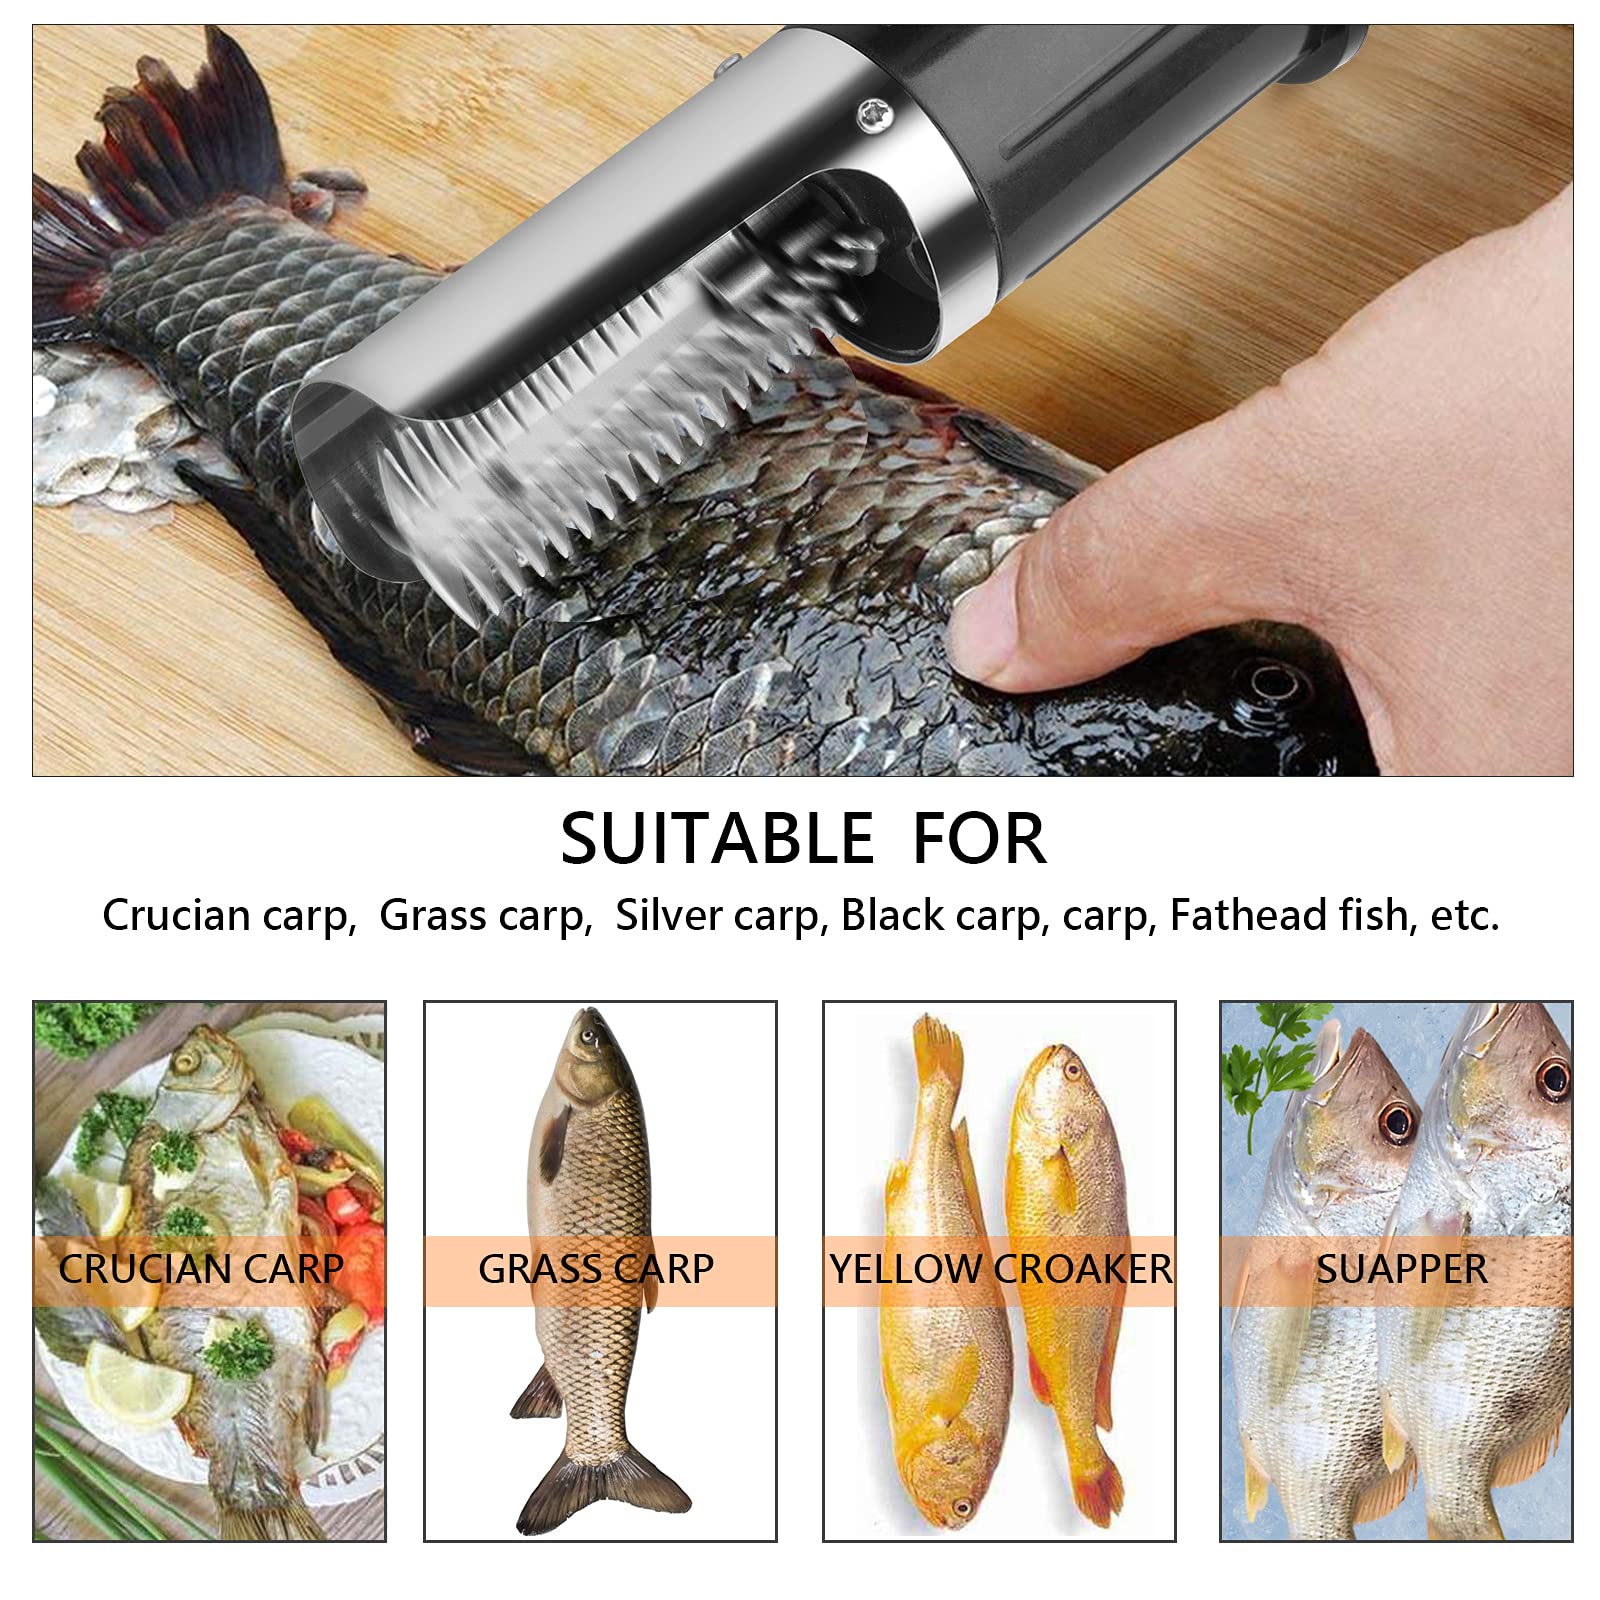 Quebuygo Electric Fish Scaler, Hand-held Cordless Powerful Electric Fish Scraper with Extra Stainless Cutter Head, Electric Descaler Fish Cleaner Tool Waterproof Design for Fish Market and Kitchen